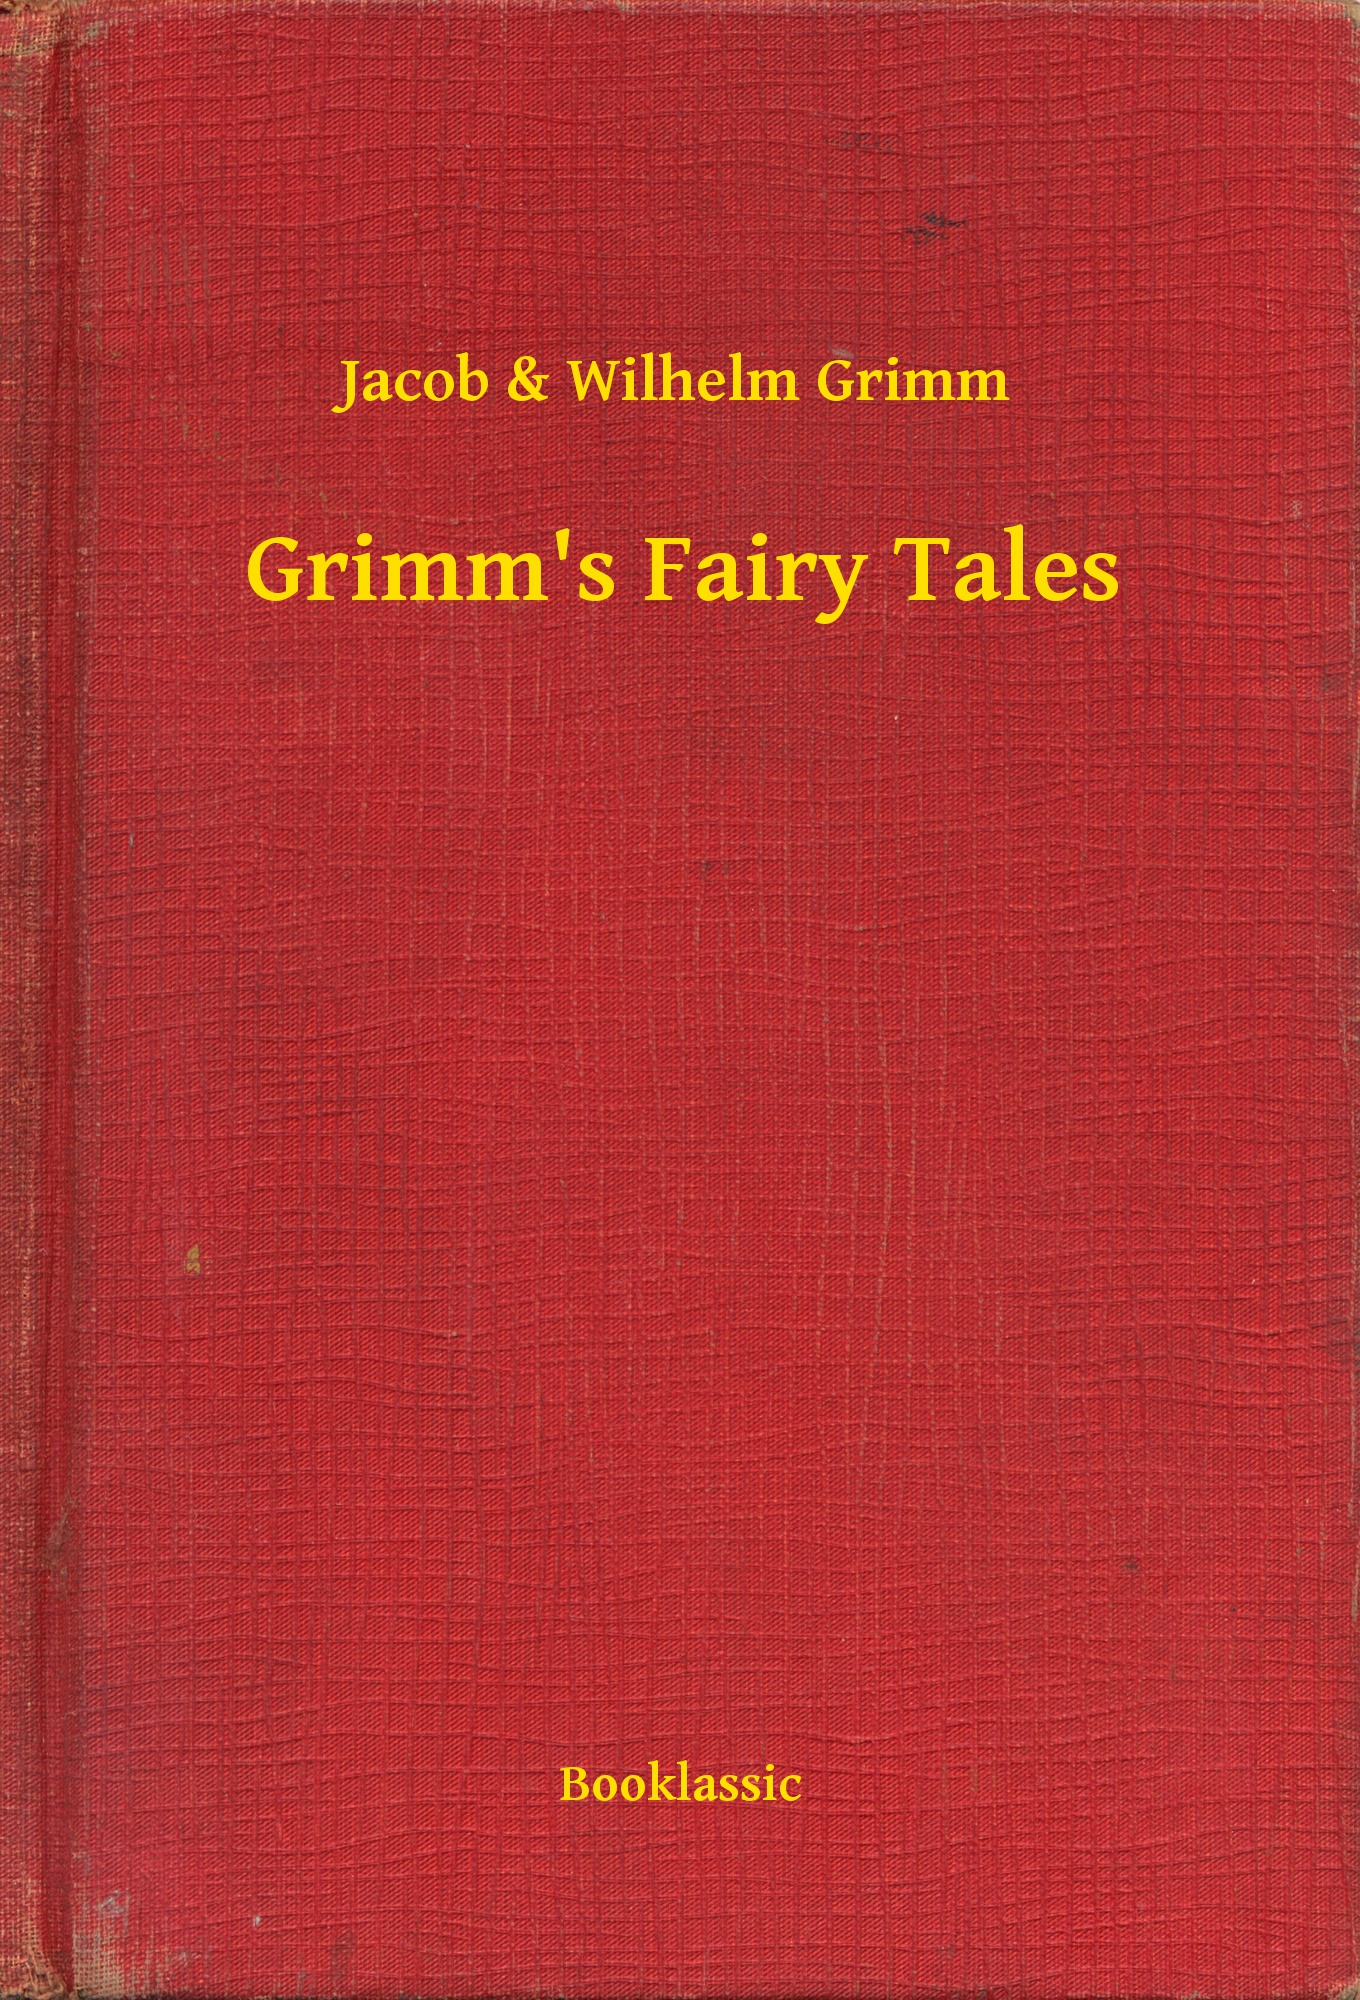 Grimm"s Fairy Tales